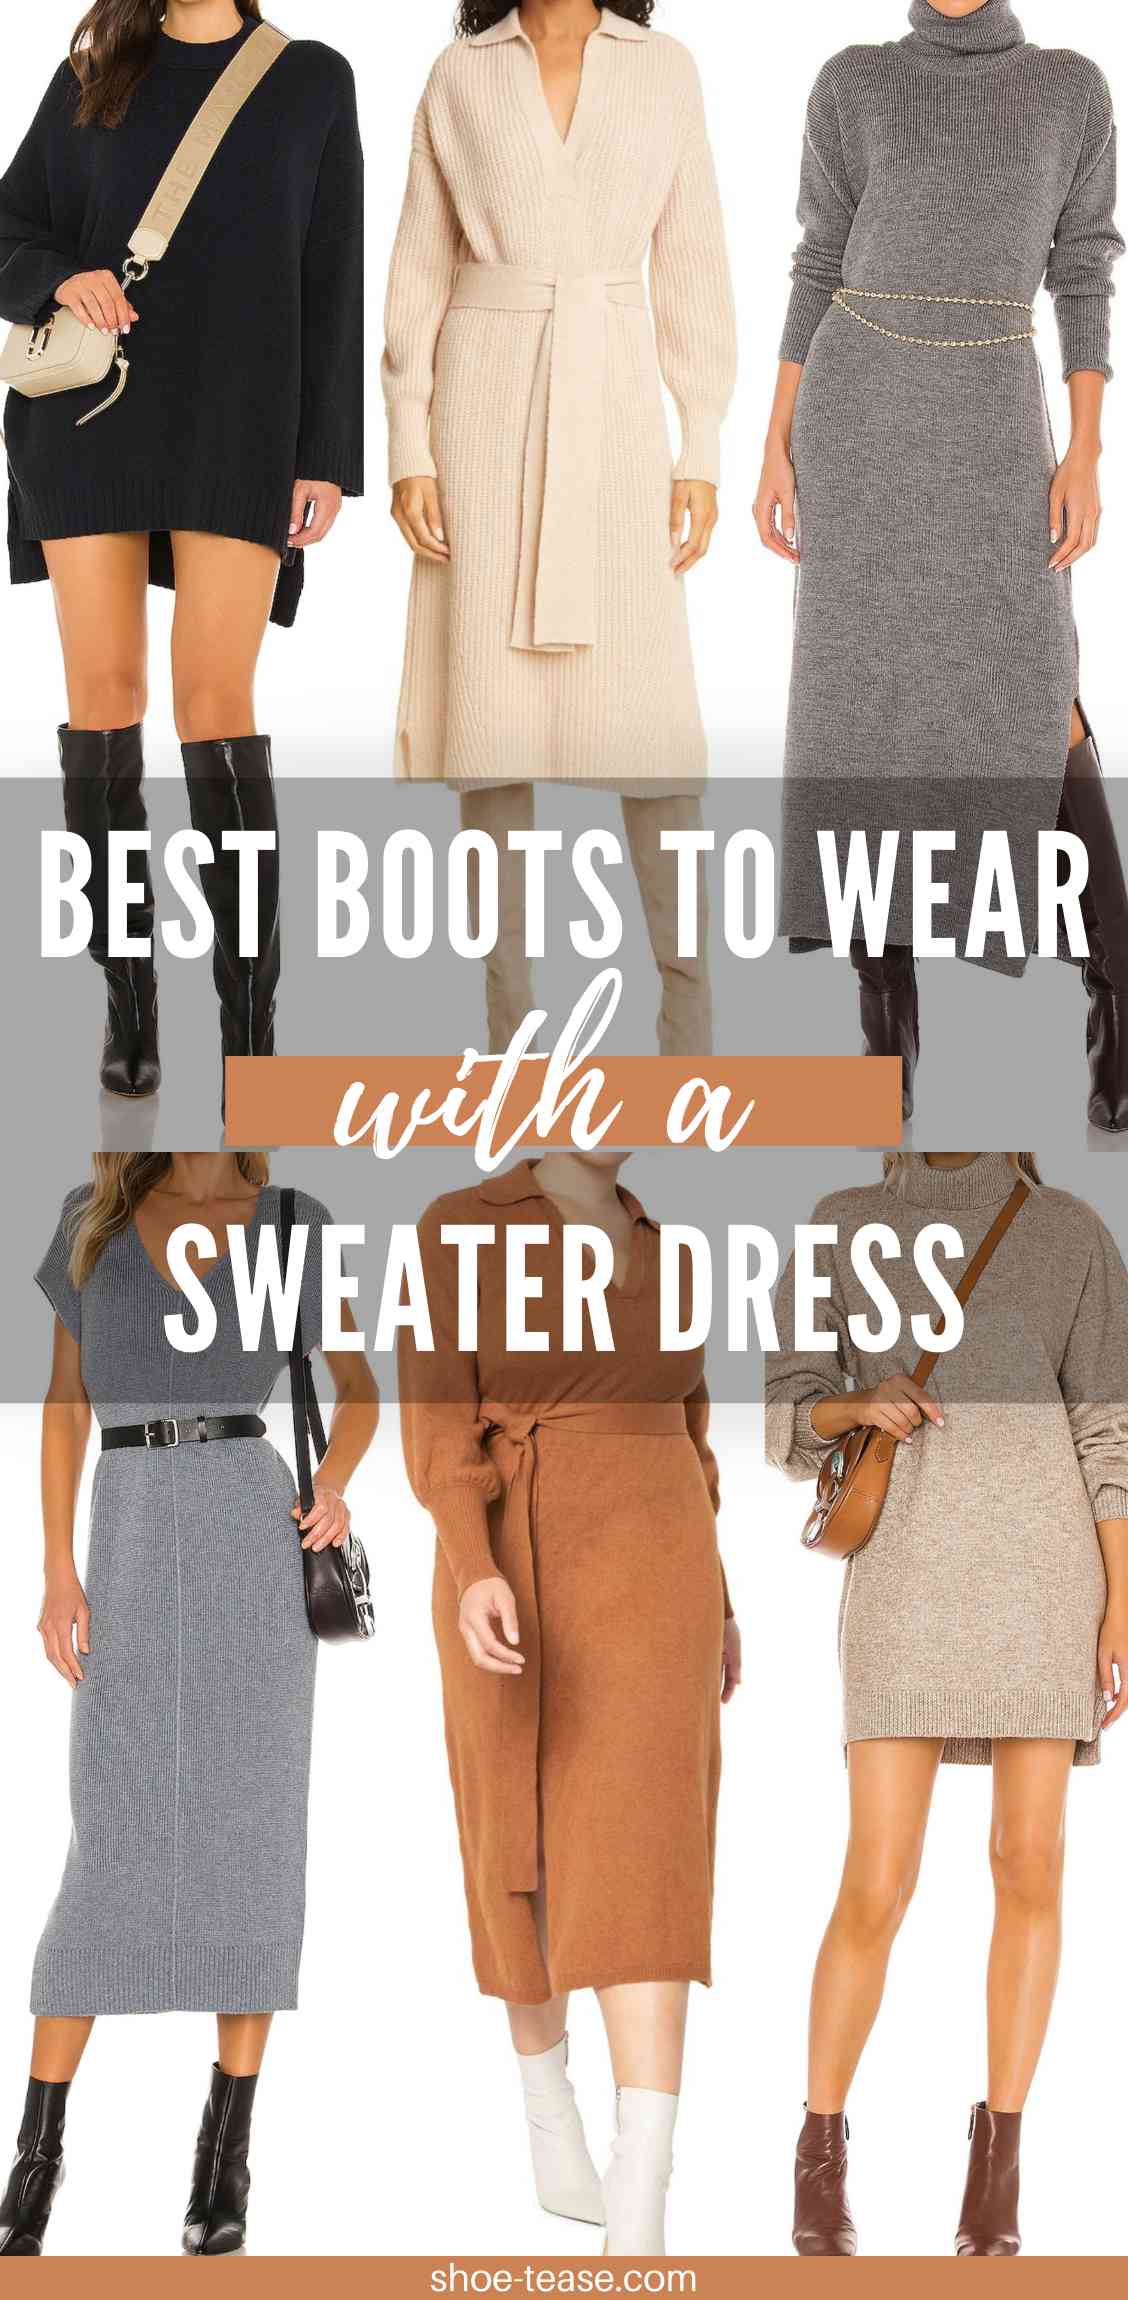 How to Wear a Sweater Dress with Boots & Shoes: from Ankle Boots to High Boots!